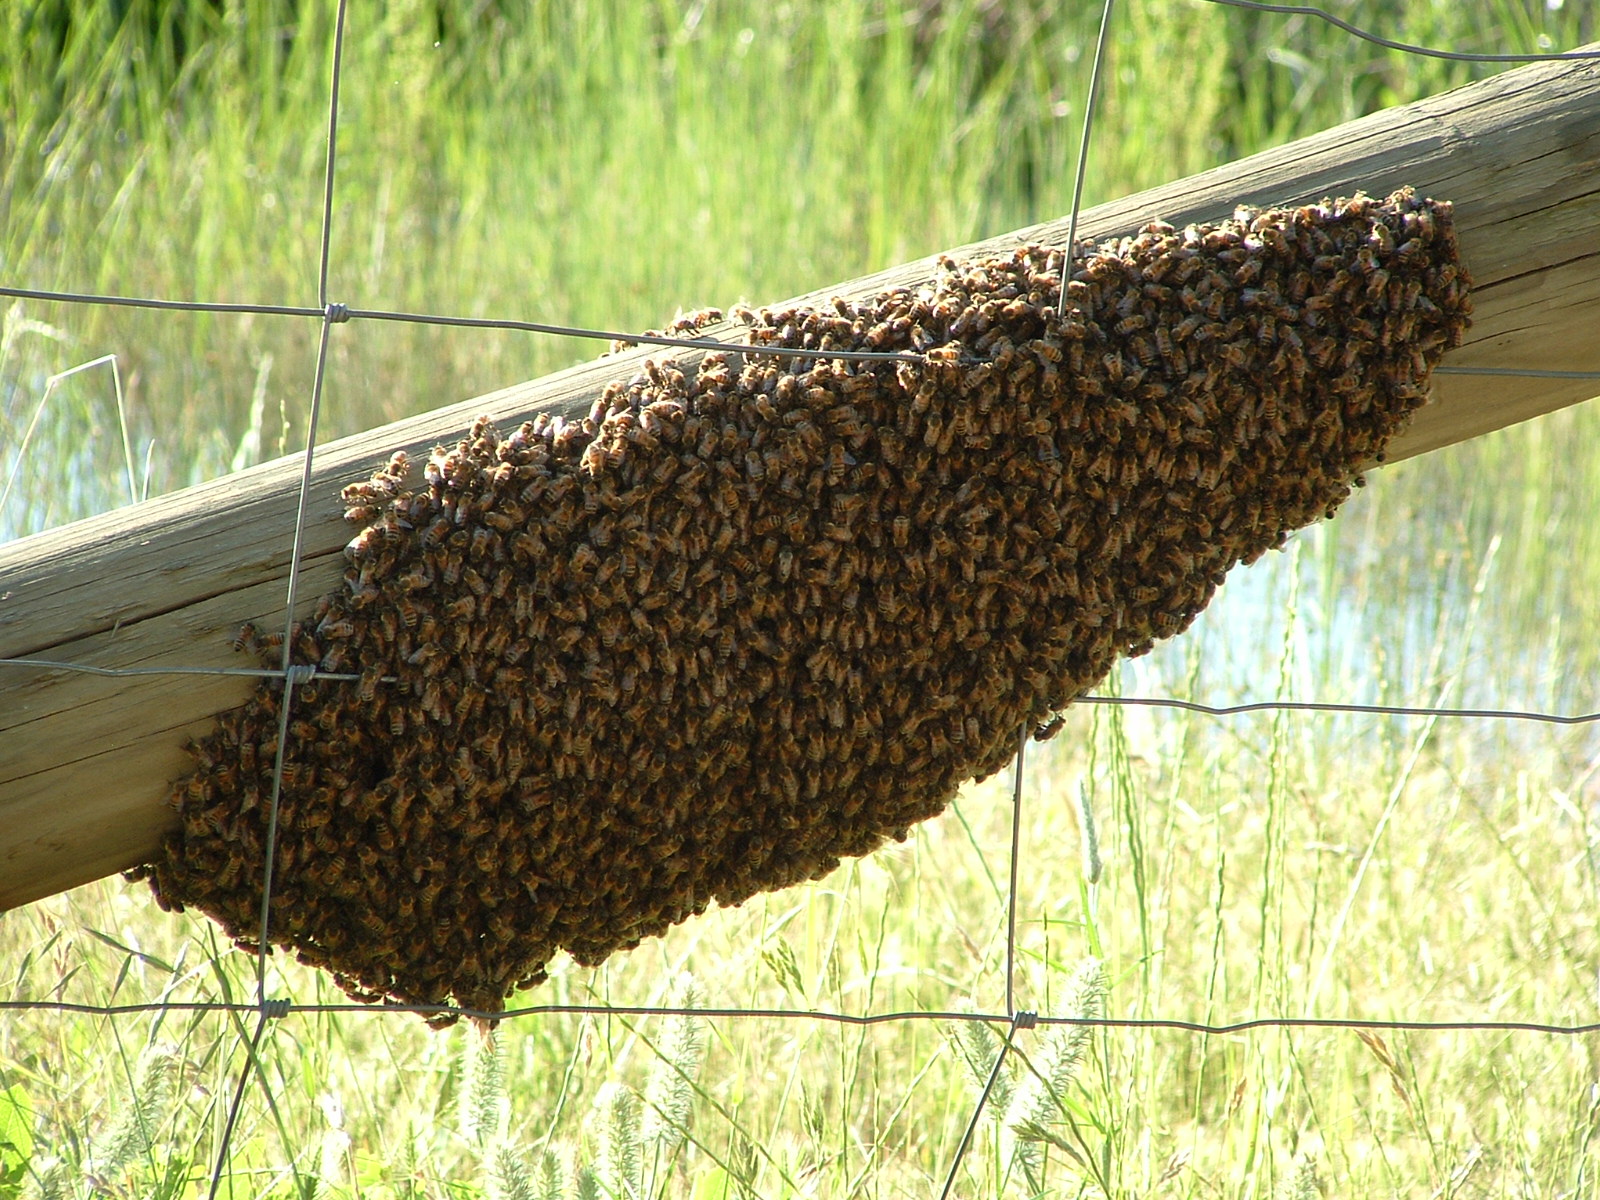 Picture of Swarm on a Fence